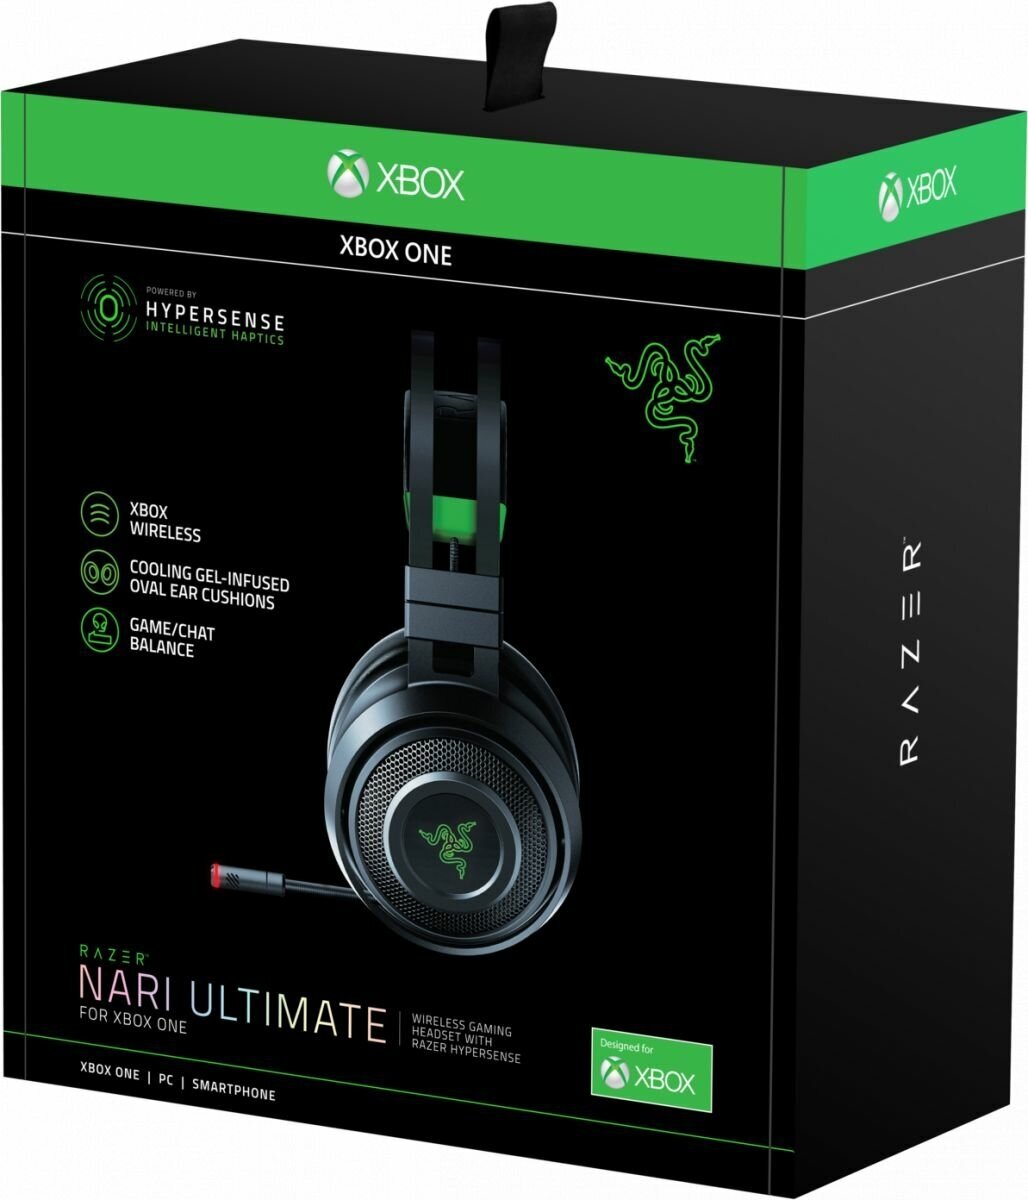 Razer Nari Ultimate - Wireless Gaming Headset with HyperSense Technology - FRML Packaging - фото №7